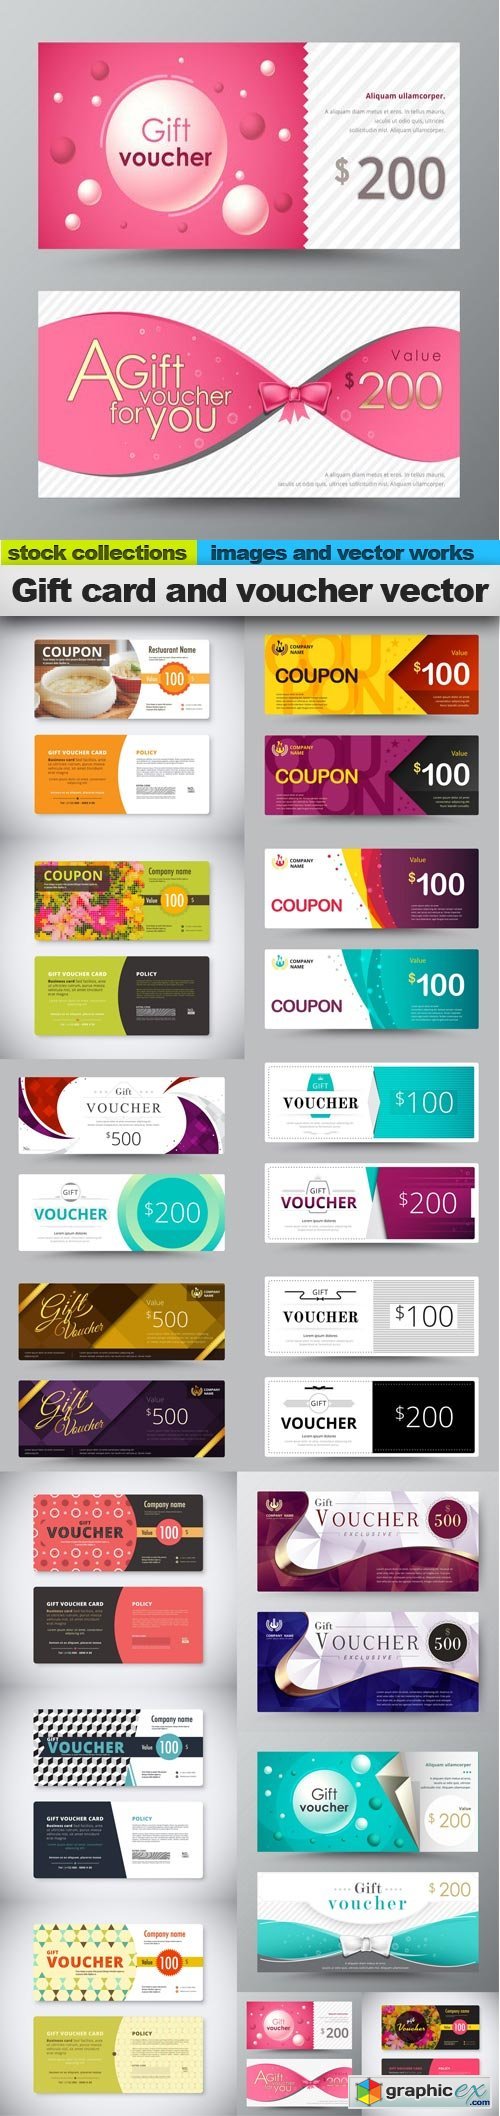 Gift card and voucher vector